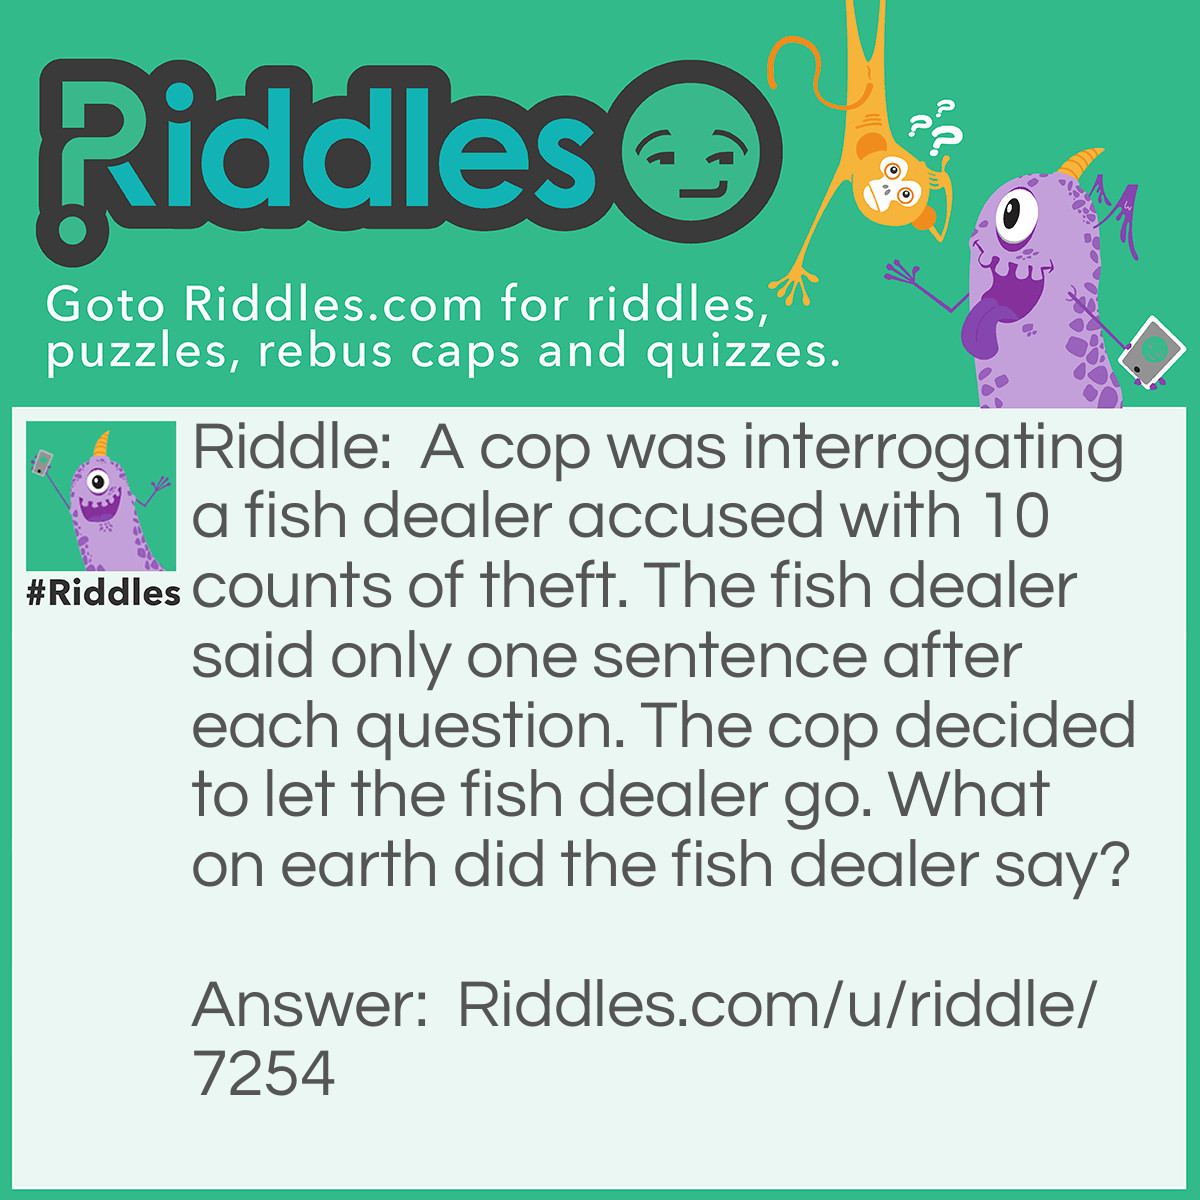 Riddle: A cop was interrogating a fish dealer accused with 10 counts of theft. The fish dealer said only one sentence after each question. The cop decided to let the fish dealer go. What on earth did the fish dealer say? Answer: “I did it just for the halibut!”